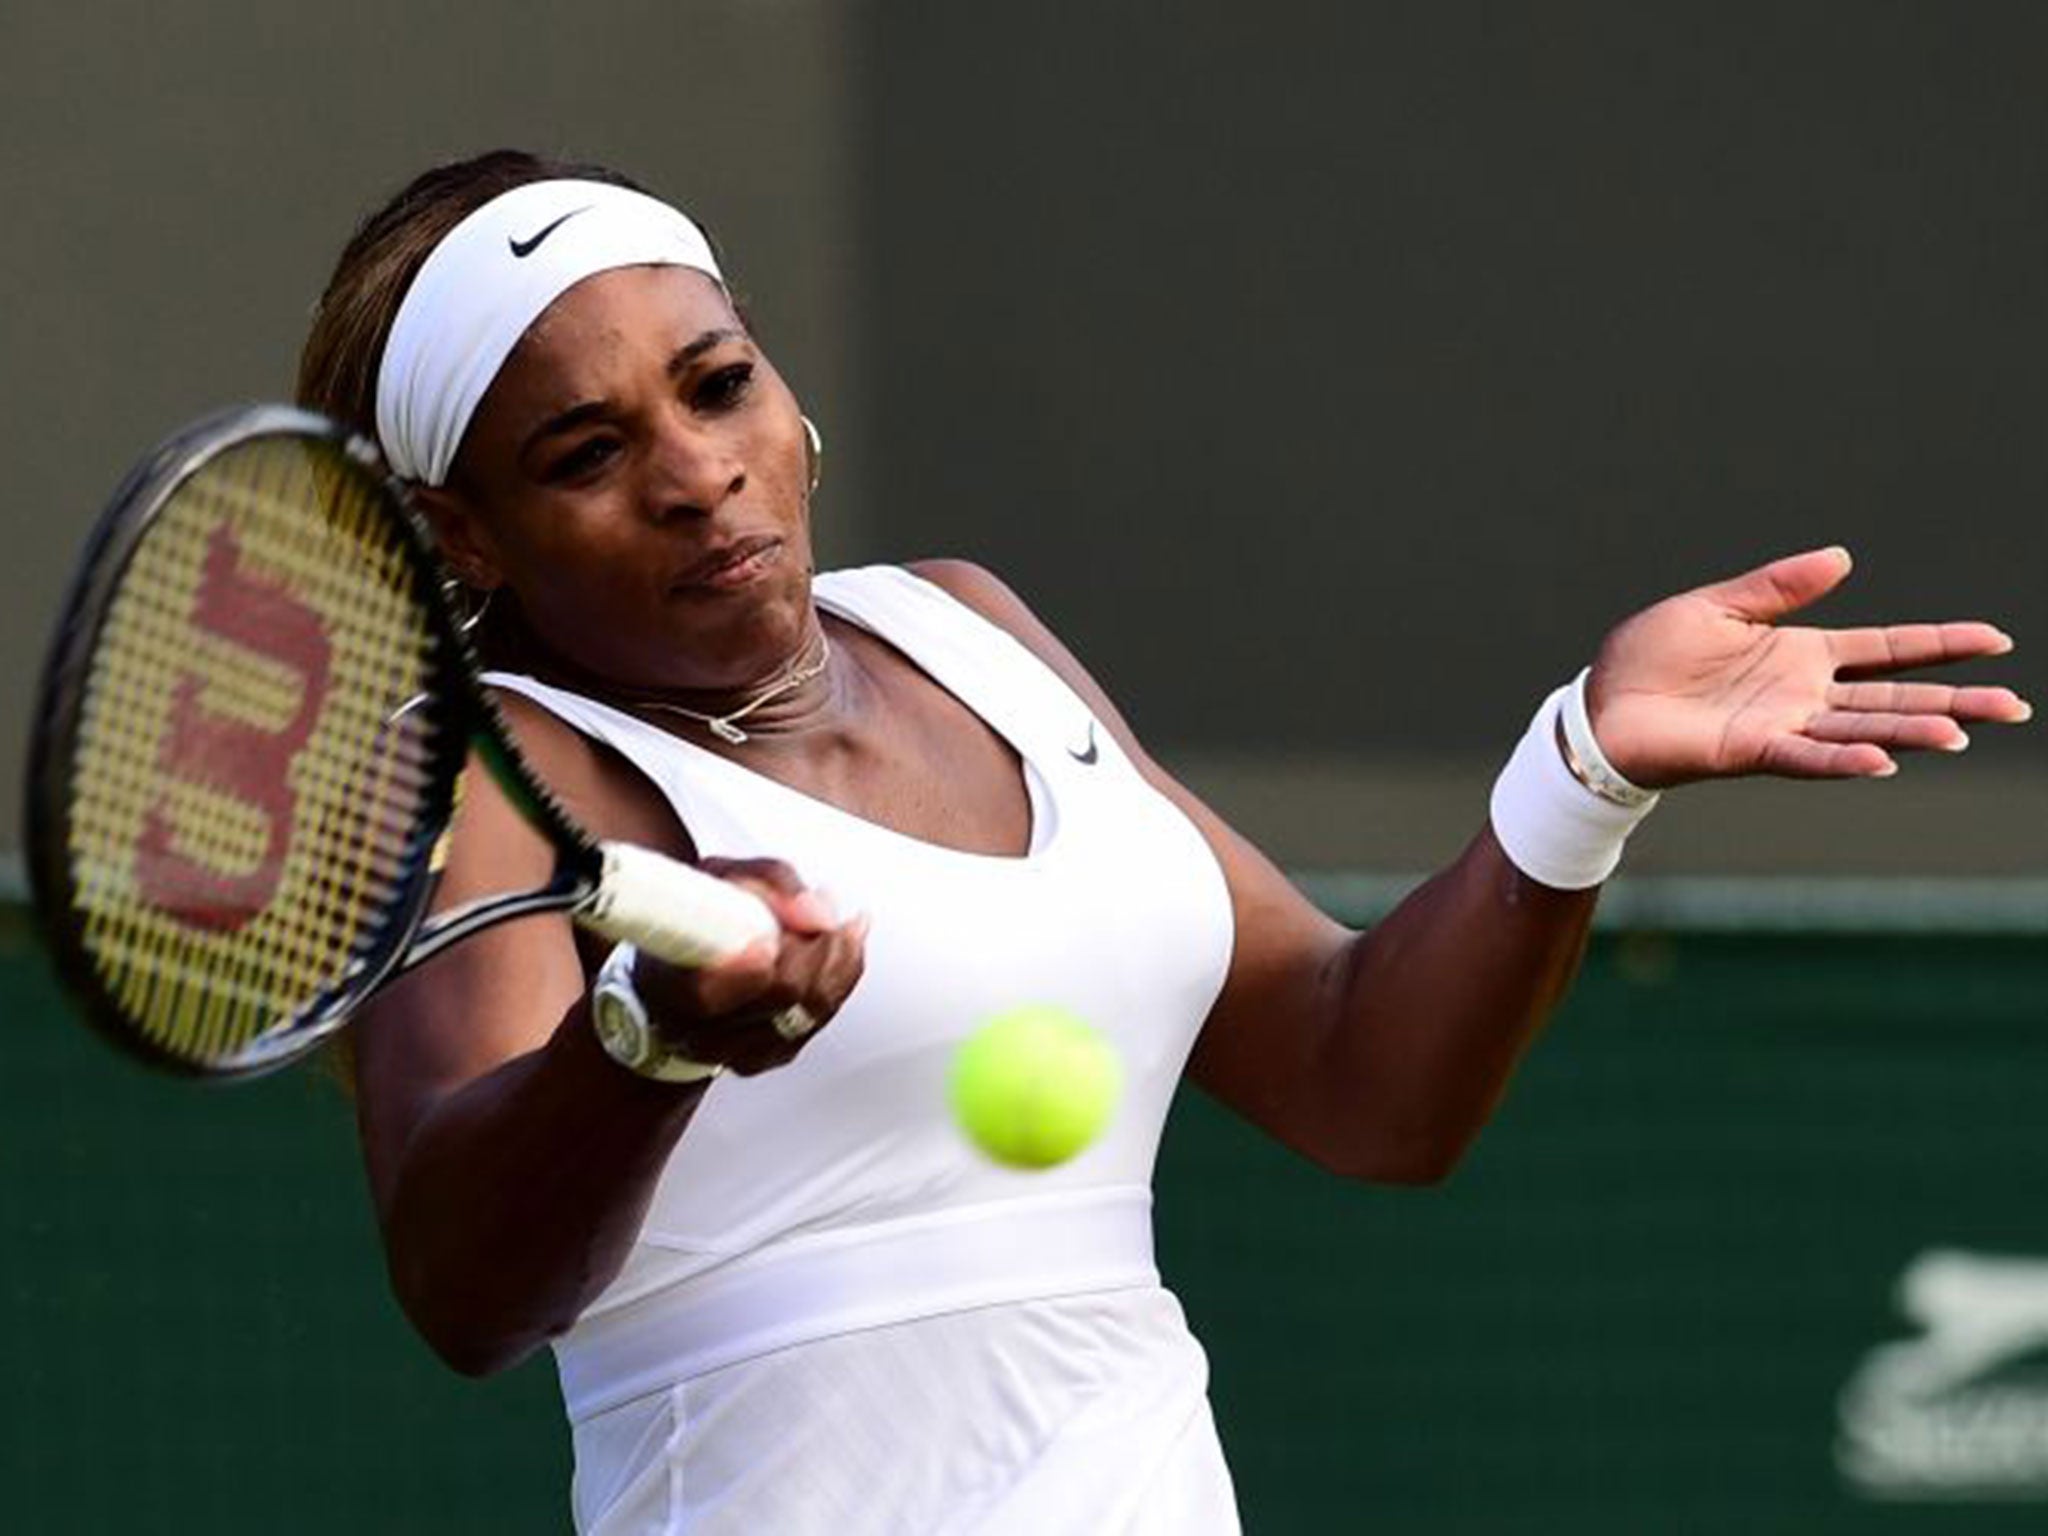 Wimbledon 2015 The 12 women to watch at this years tournament The Independent The Independent